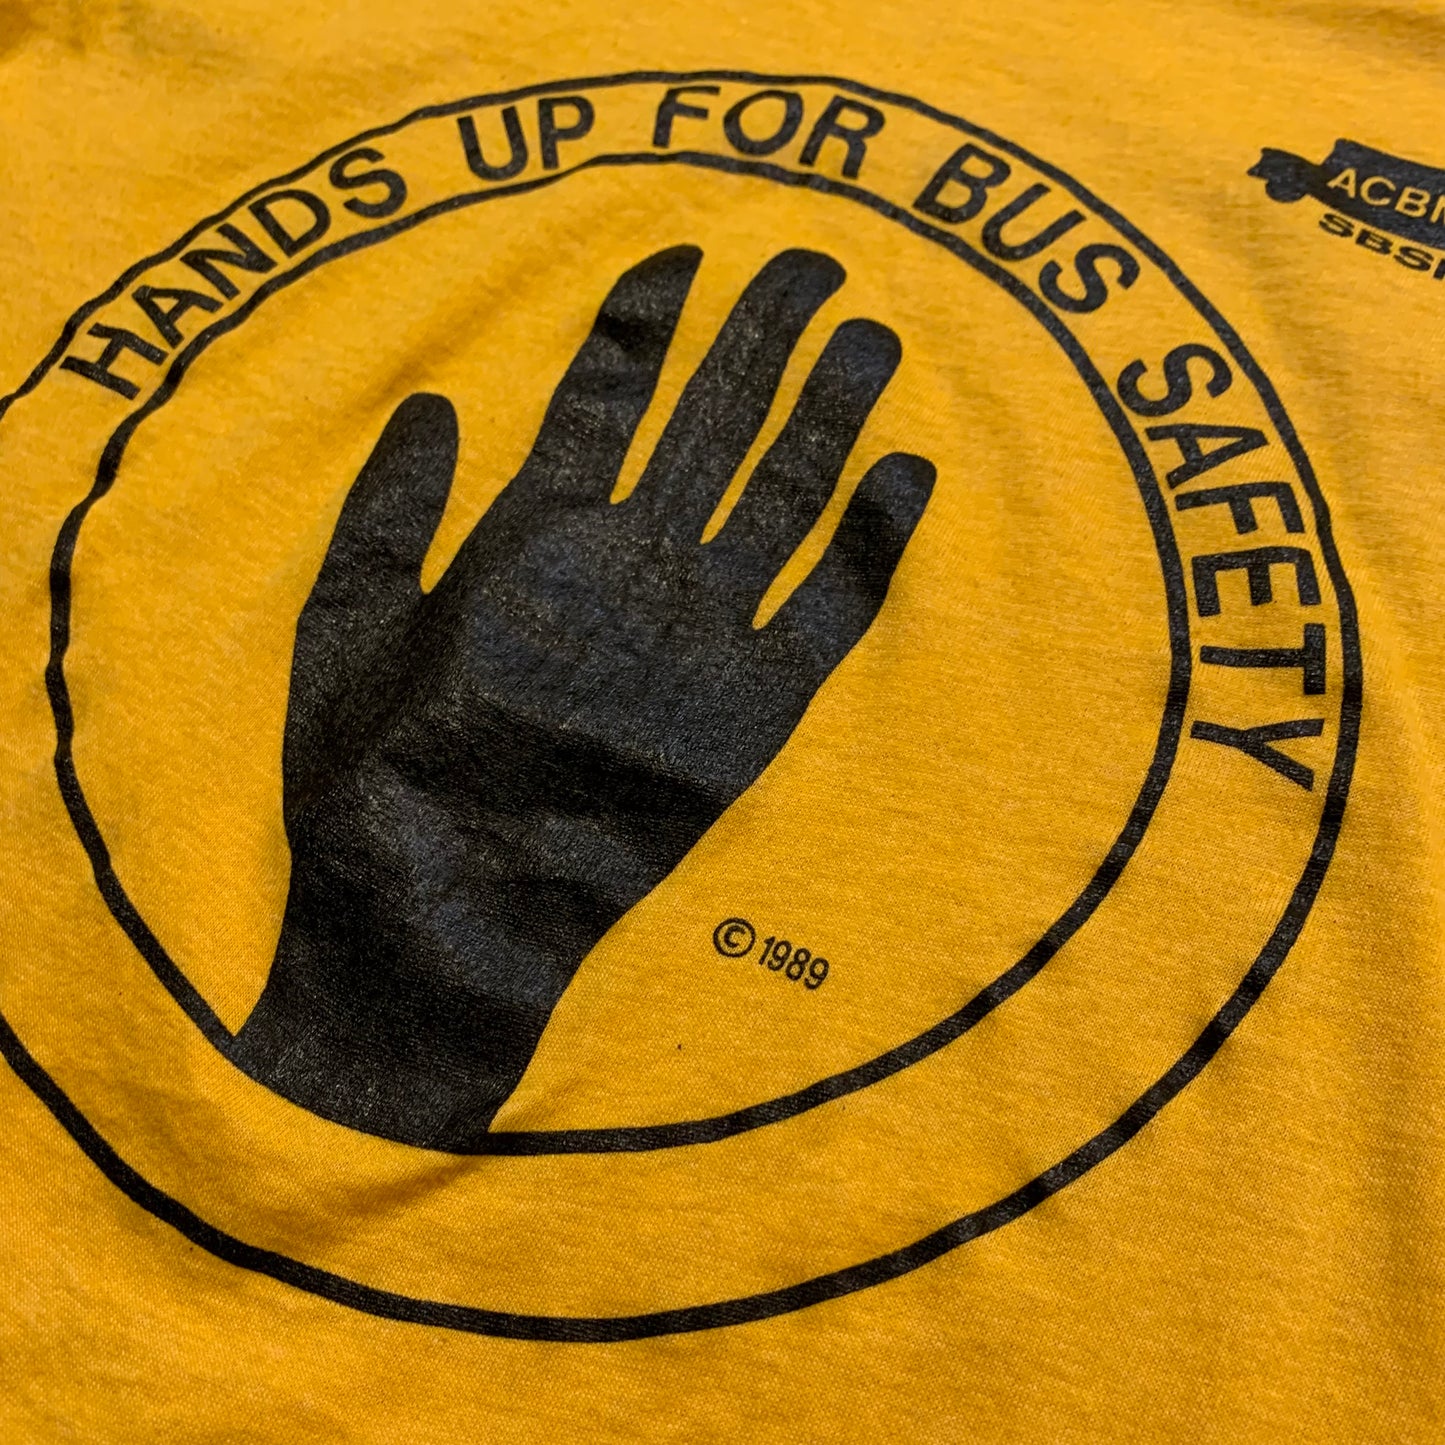 1989 Hands Up For Bus Safety Single Stitch T-Shirt